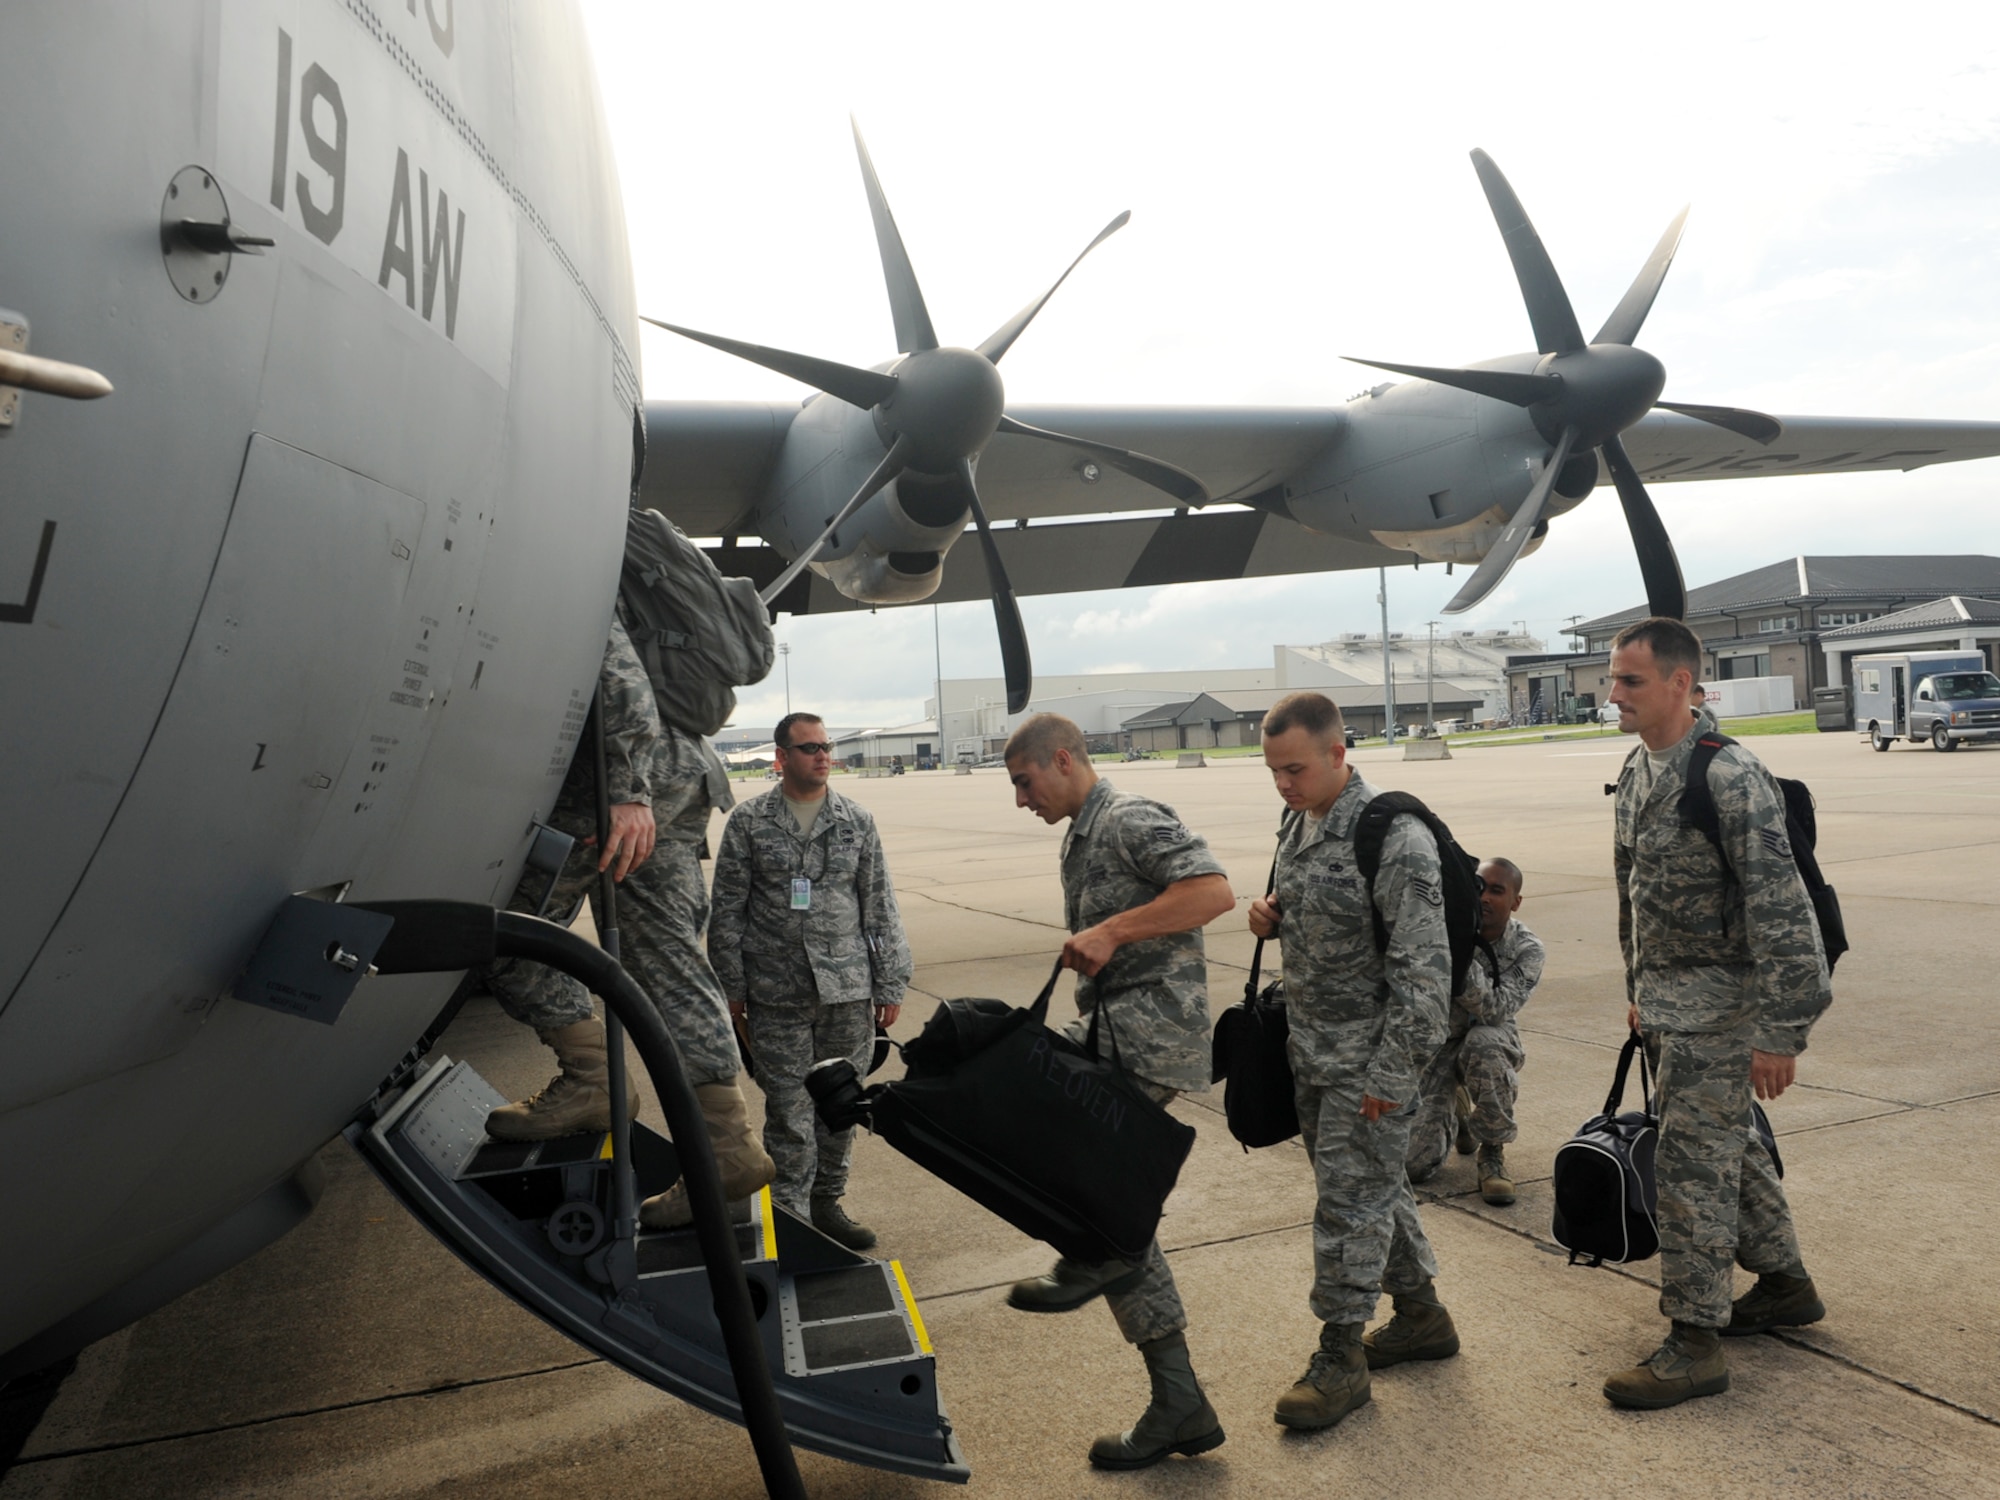 LITTLE ROCK AIR FORCE BASE, Ark. -- The 19th Airlift Wing Rodeo team boards a C130-J July 17. They will be participating in Air Mobility Command's Rodeo 2009 in a readiness competition at McChord Air Force Base, Wash., July 19-24. (U. S. Air Force photo by Senior Airman Jim Araos)